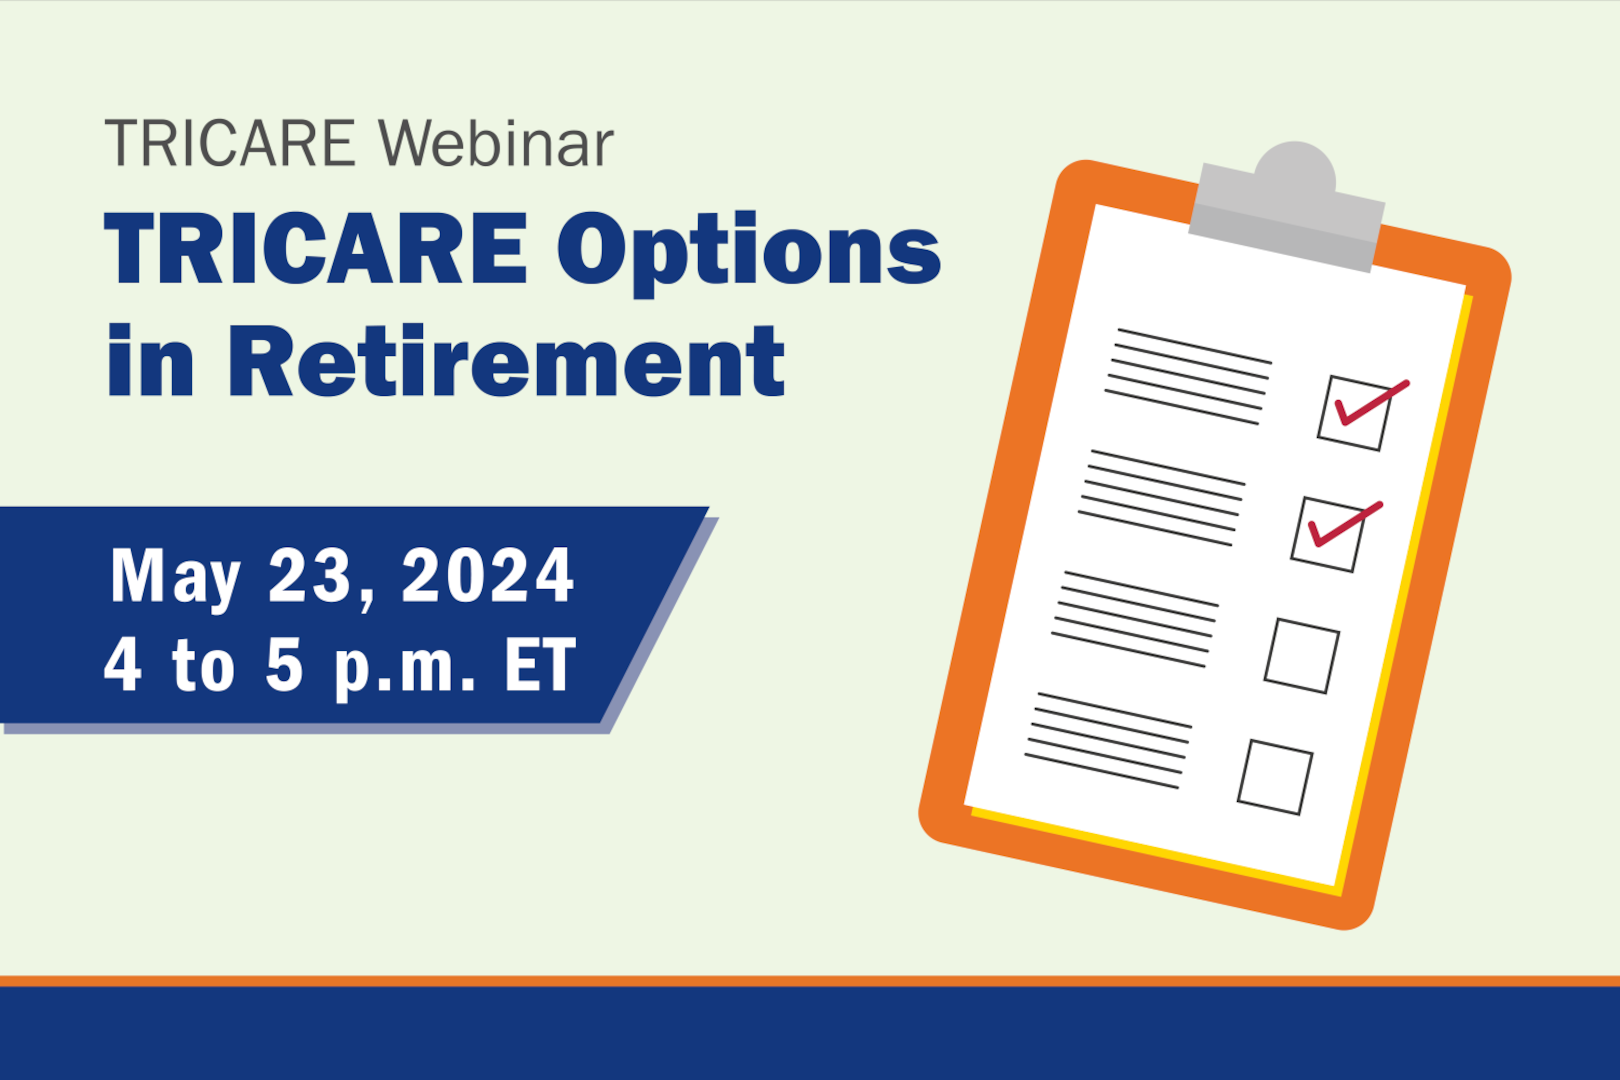 Find Answers to Your TRICARE Questions at May 23 Webinar for Those Retiring